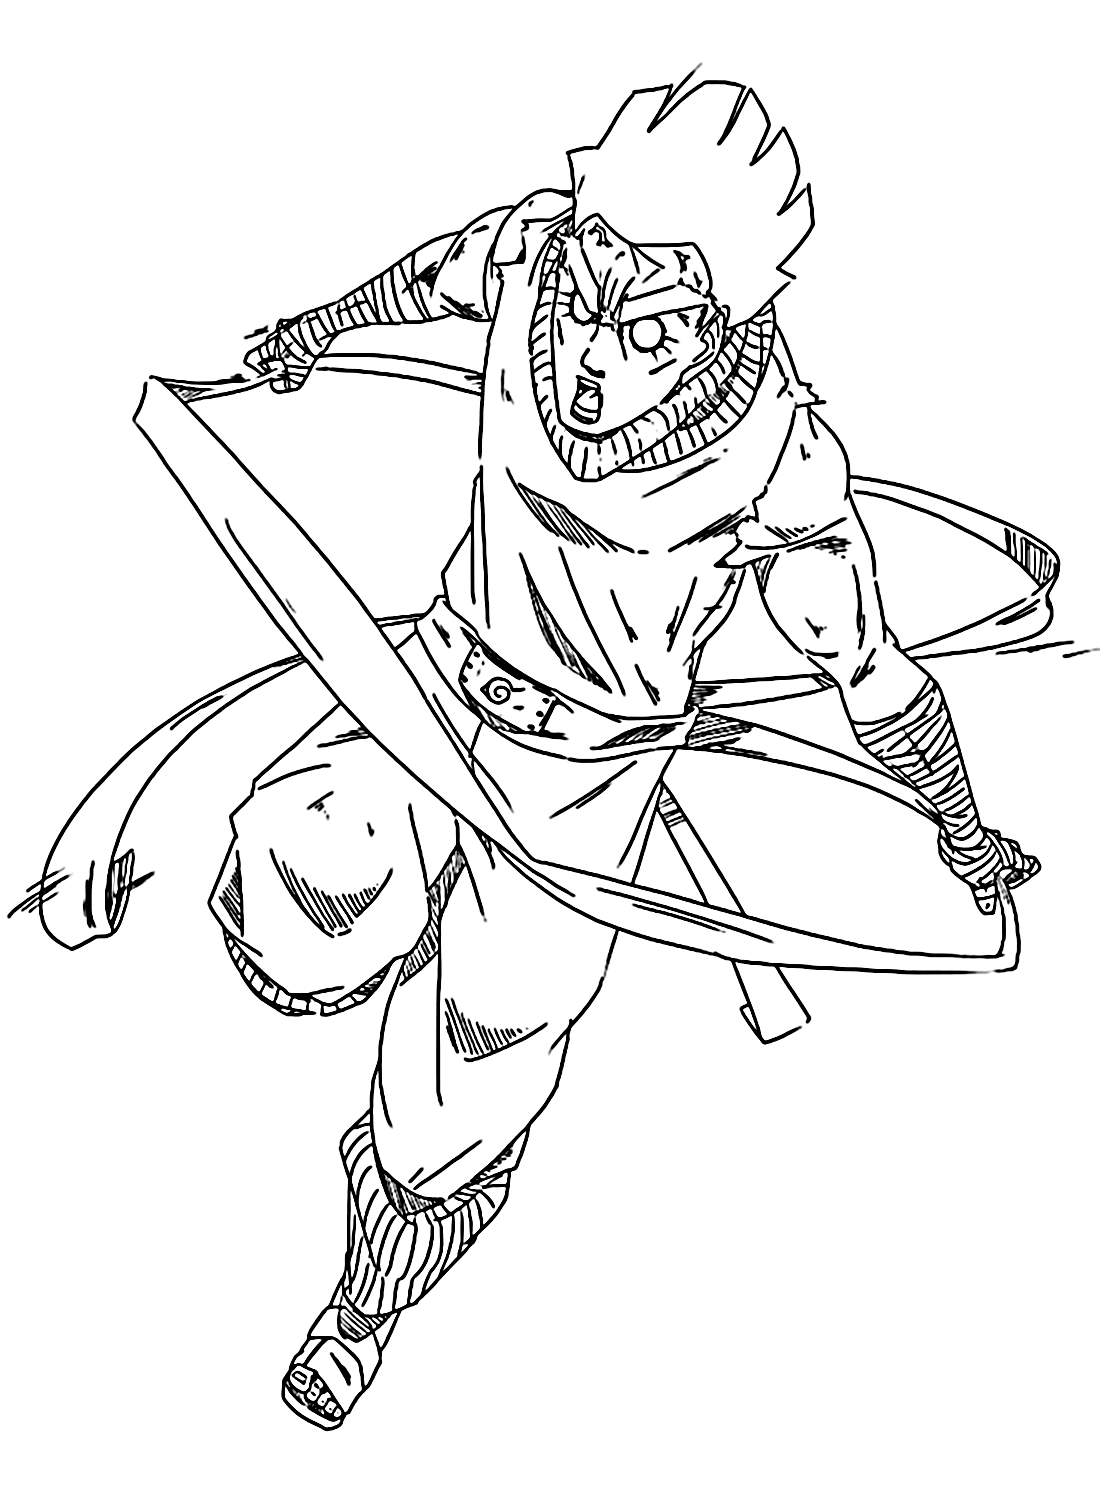 Rock Lee Coloring Sheet - Free Printable Coloring Pages